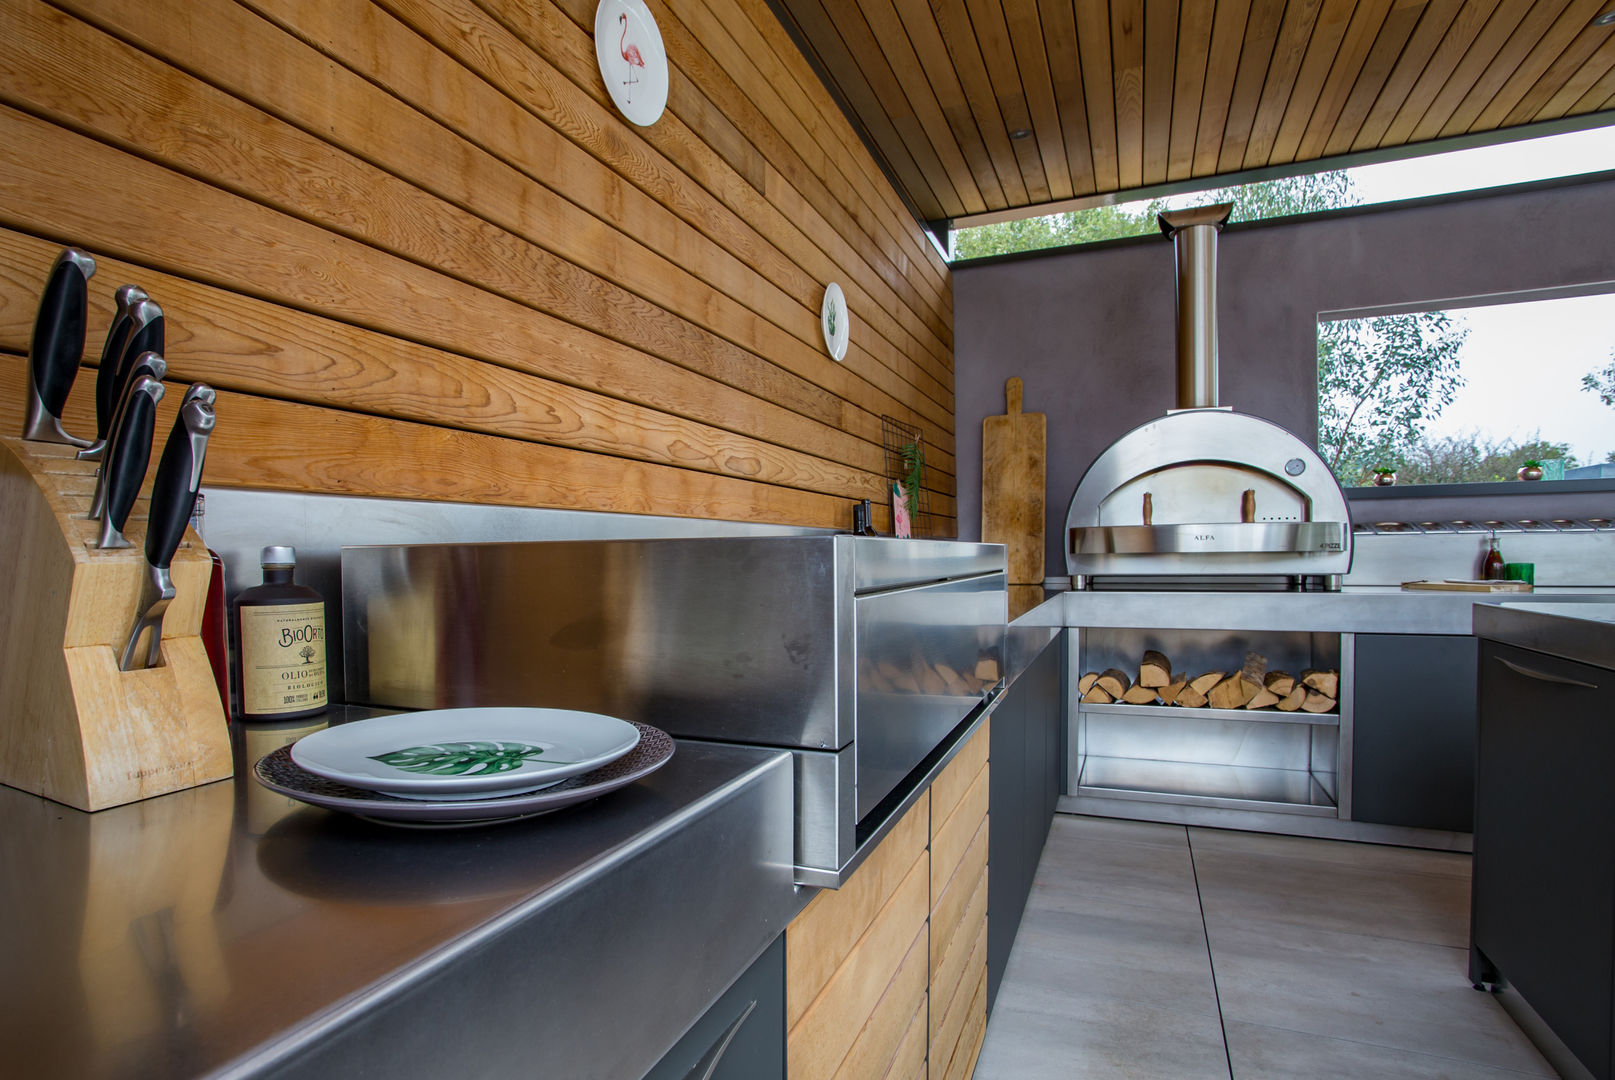 Oven on the kitchen counter Alfa Forni Modern Terrace outdoor kitchen, wood-burning, kitchen counter, home line,Accessories & decoration